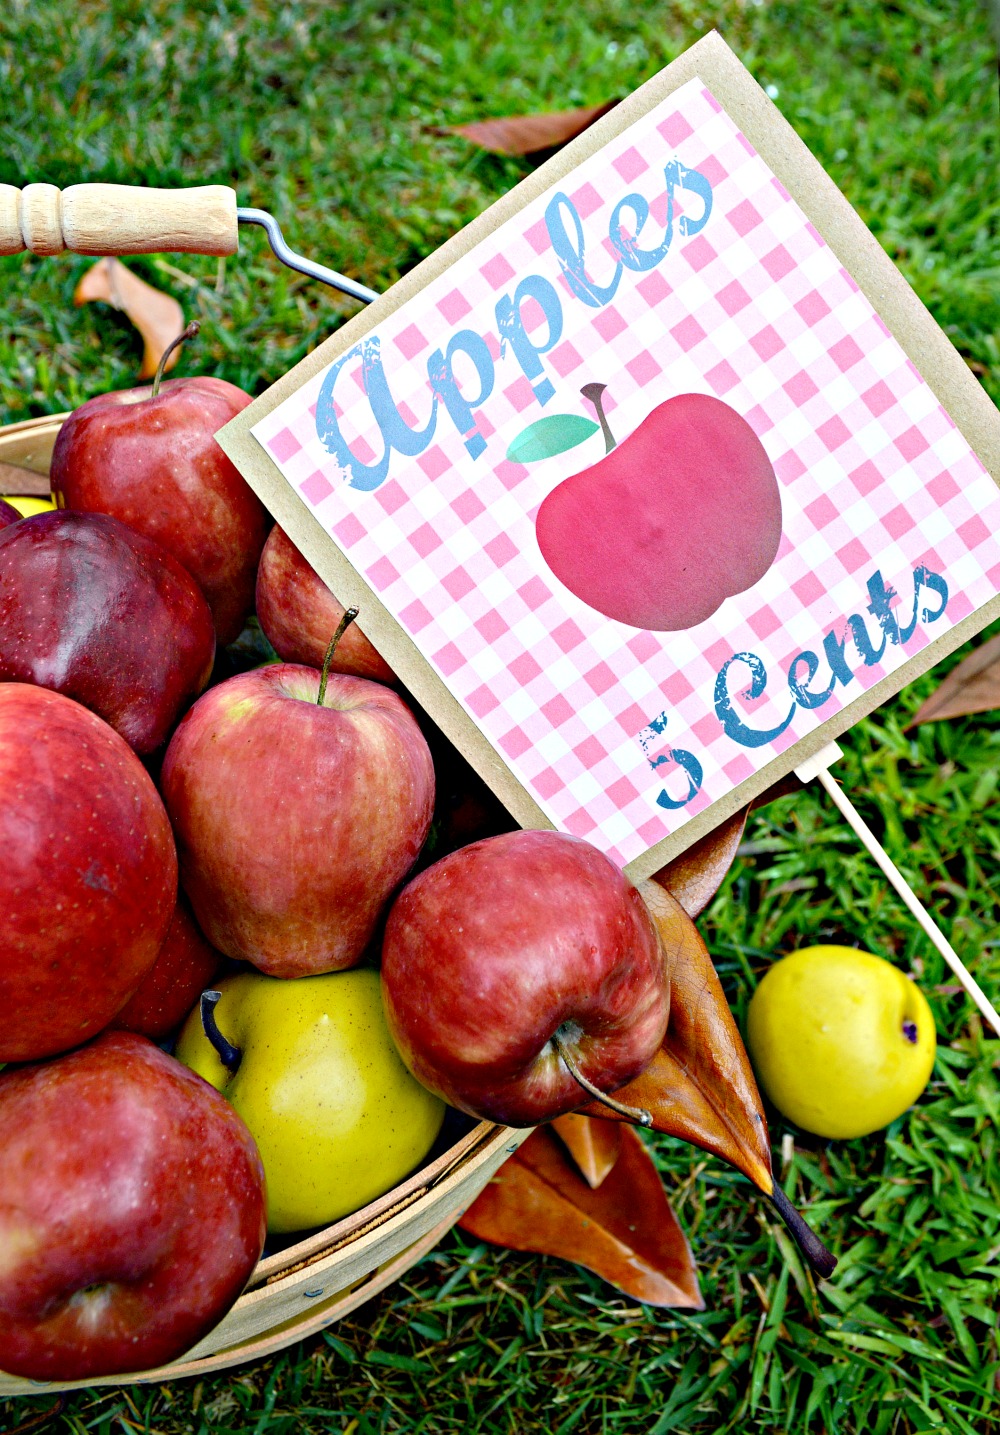 apples-5-cents-free-printable-and-vignette-my-uncommon-slice-of-suburbia